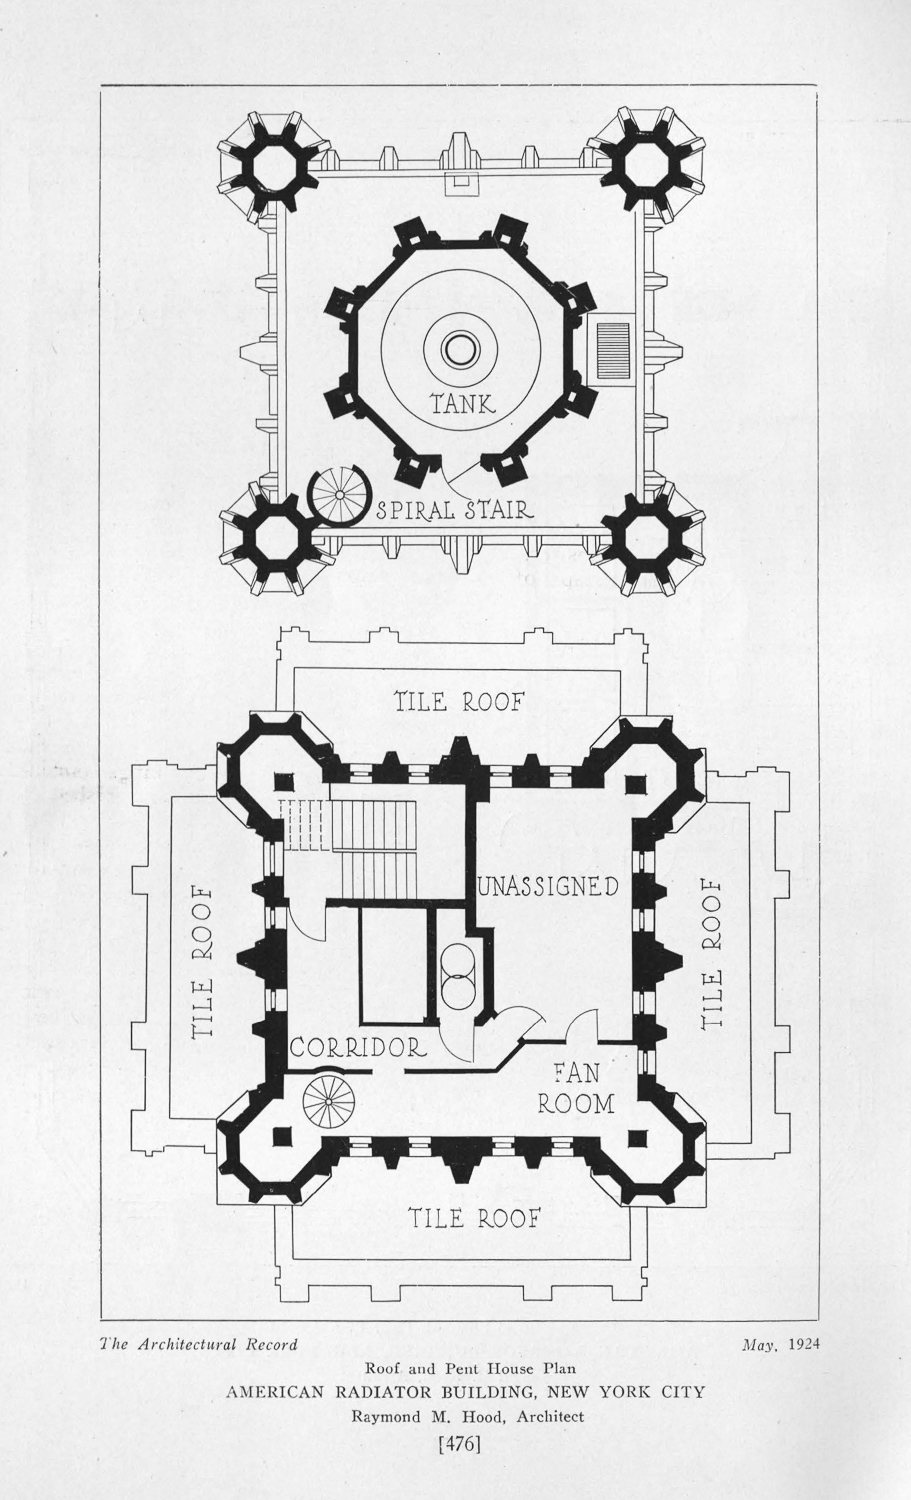 Floor plans of the penthouse and the roof levels. The plan of the penthouse in the lower half shows areas for stairs, a corridor, and a fan room. The plan is roughly square, with small rounded bays at each corner. The plan of the roof shows a central water tank and a spiral staircase. The plan is roughly square, with small round turrets at each corner.